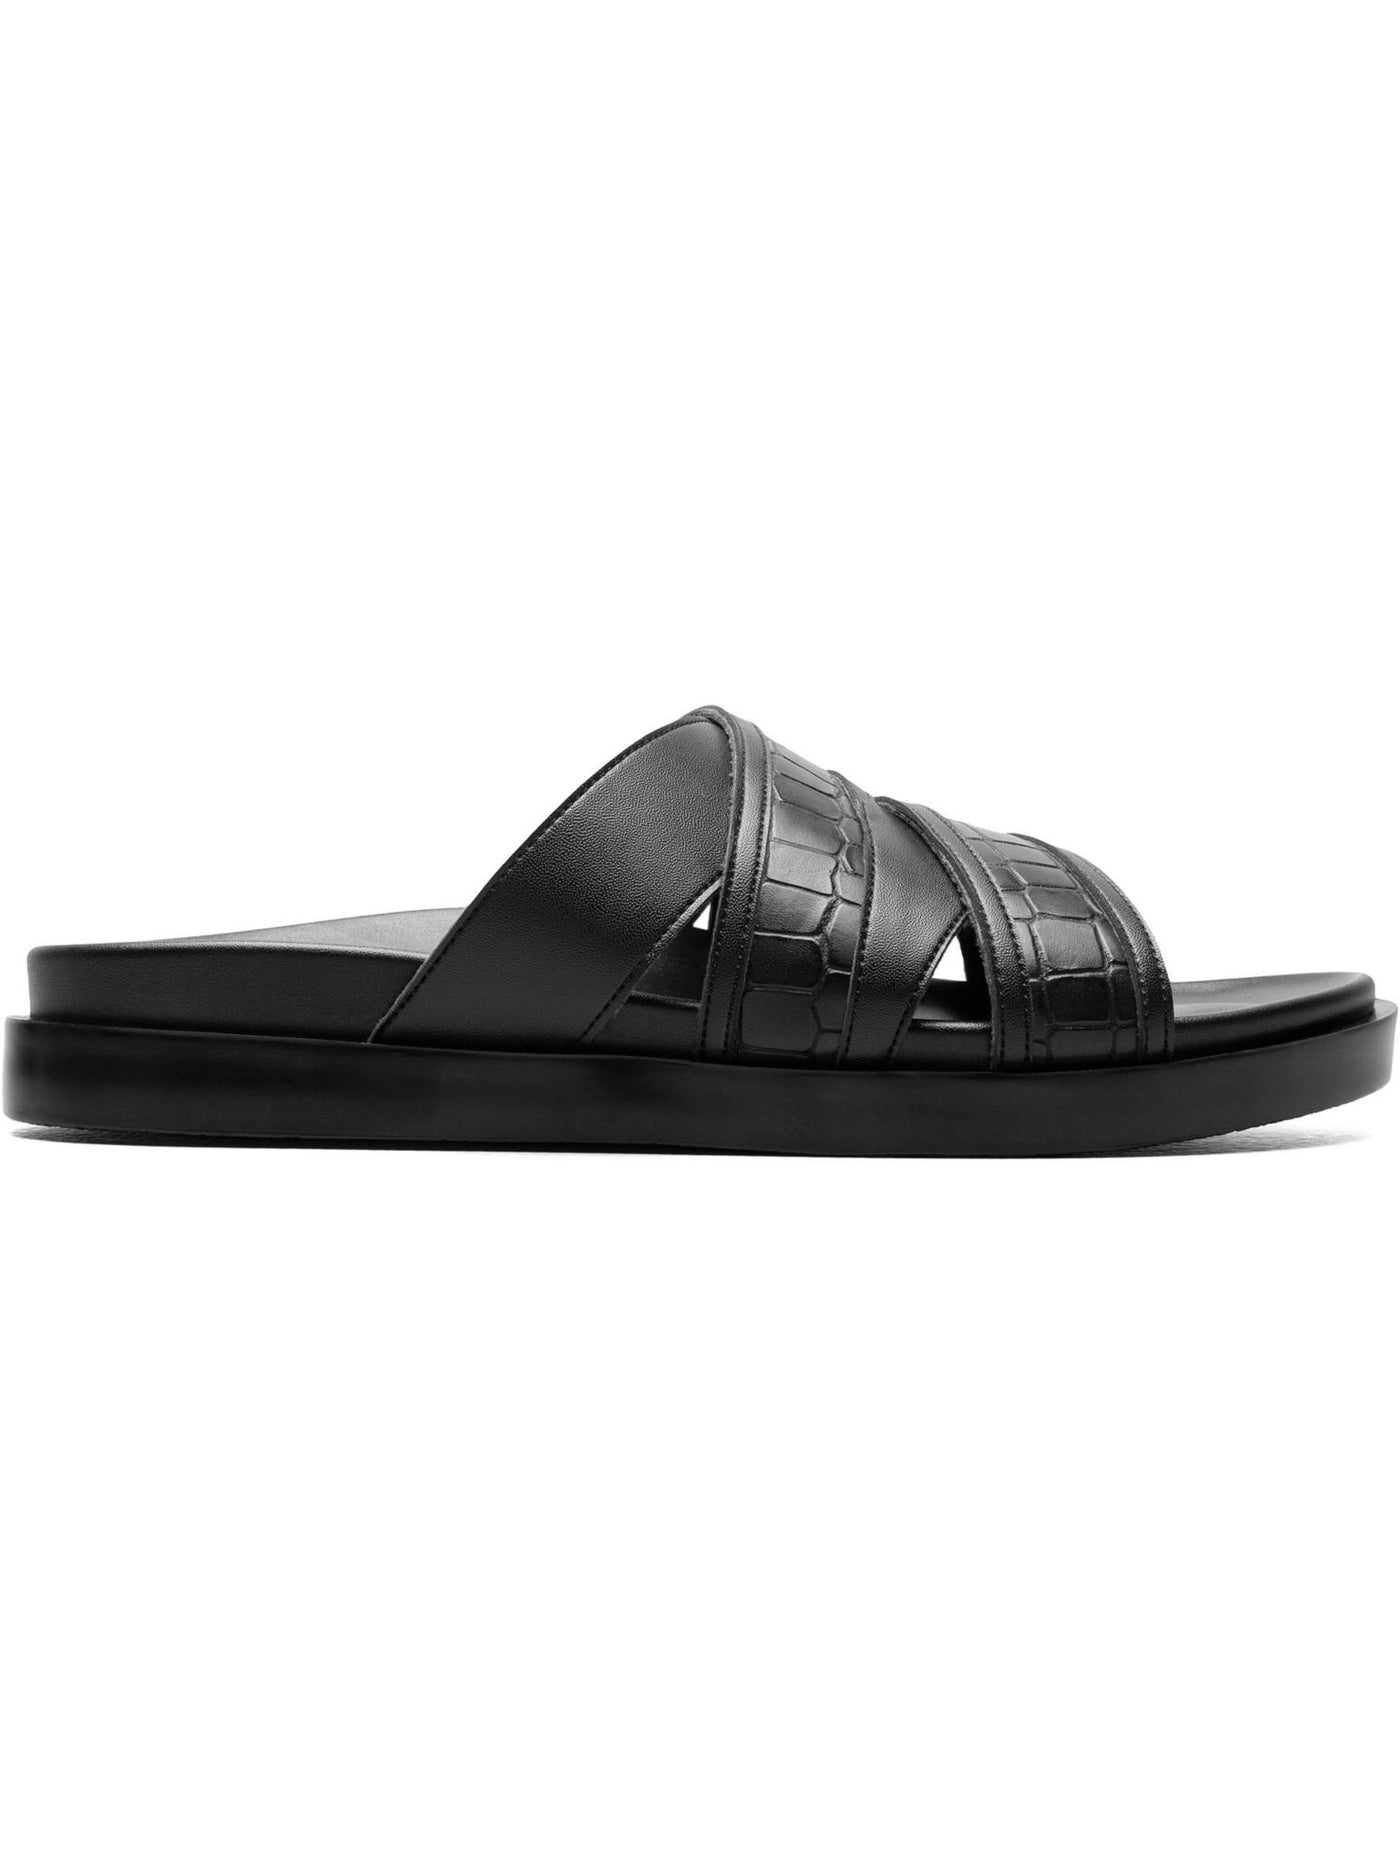 STACY ADAMS Mens Black Mixed Media Cushioned Mondo Open Toe Slip On Slide Sandals Shoes M